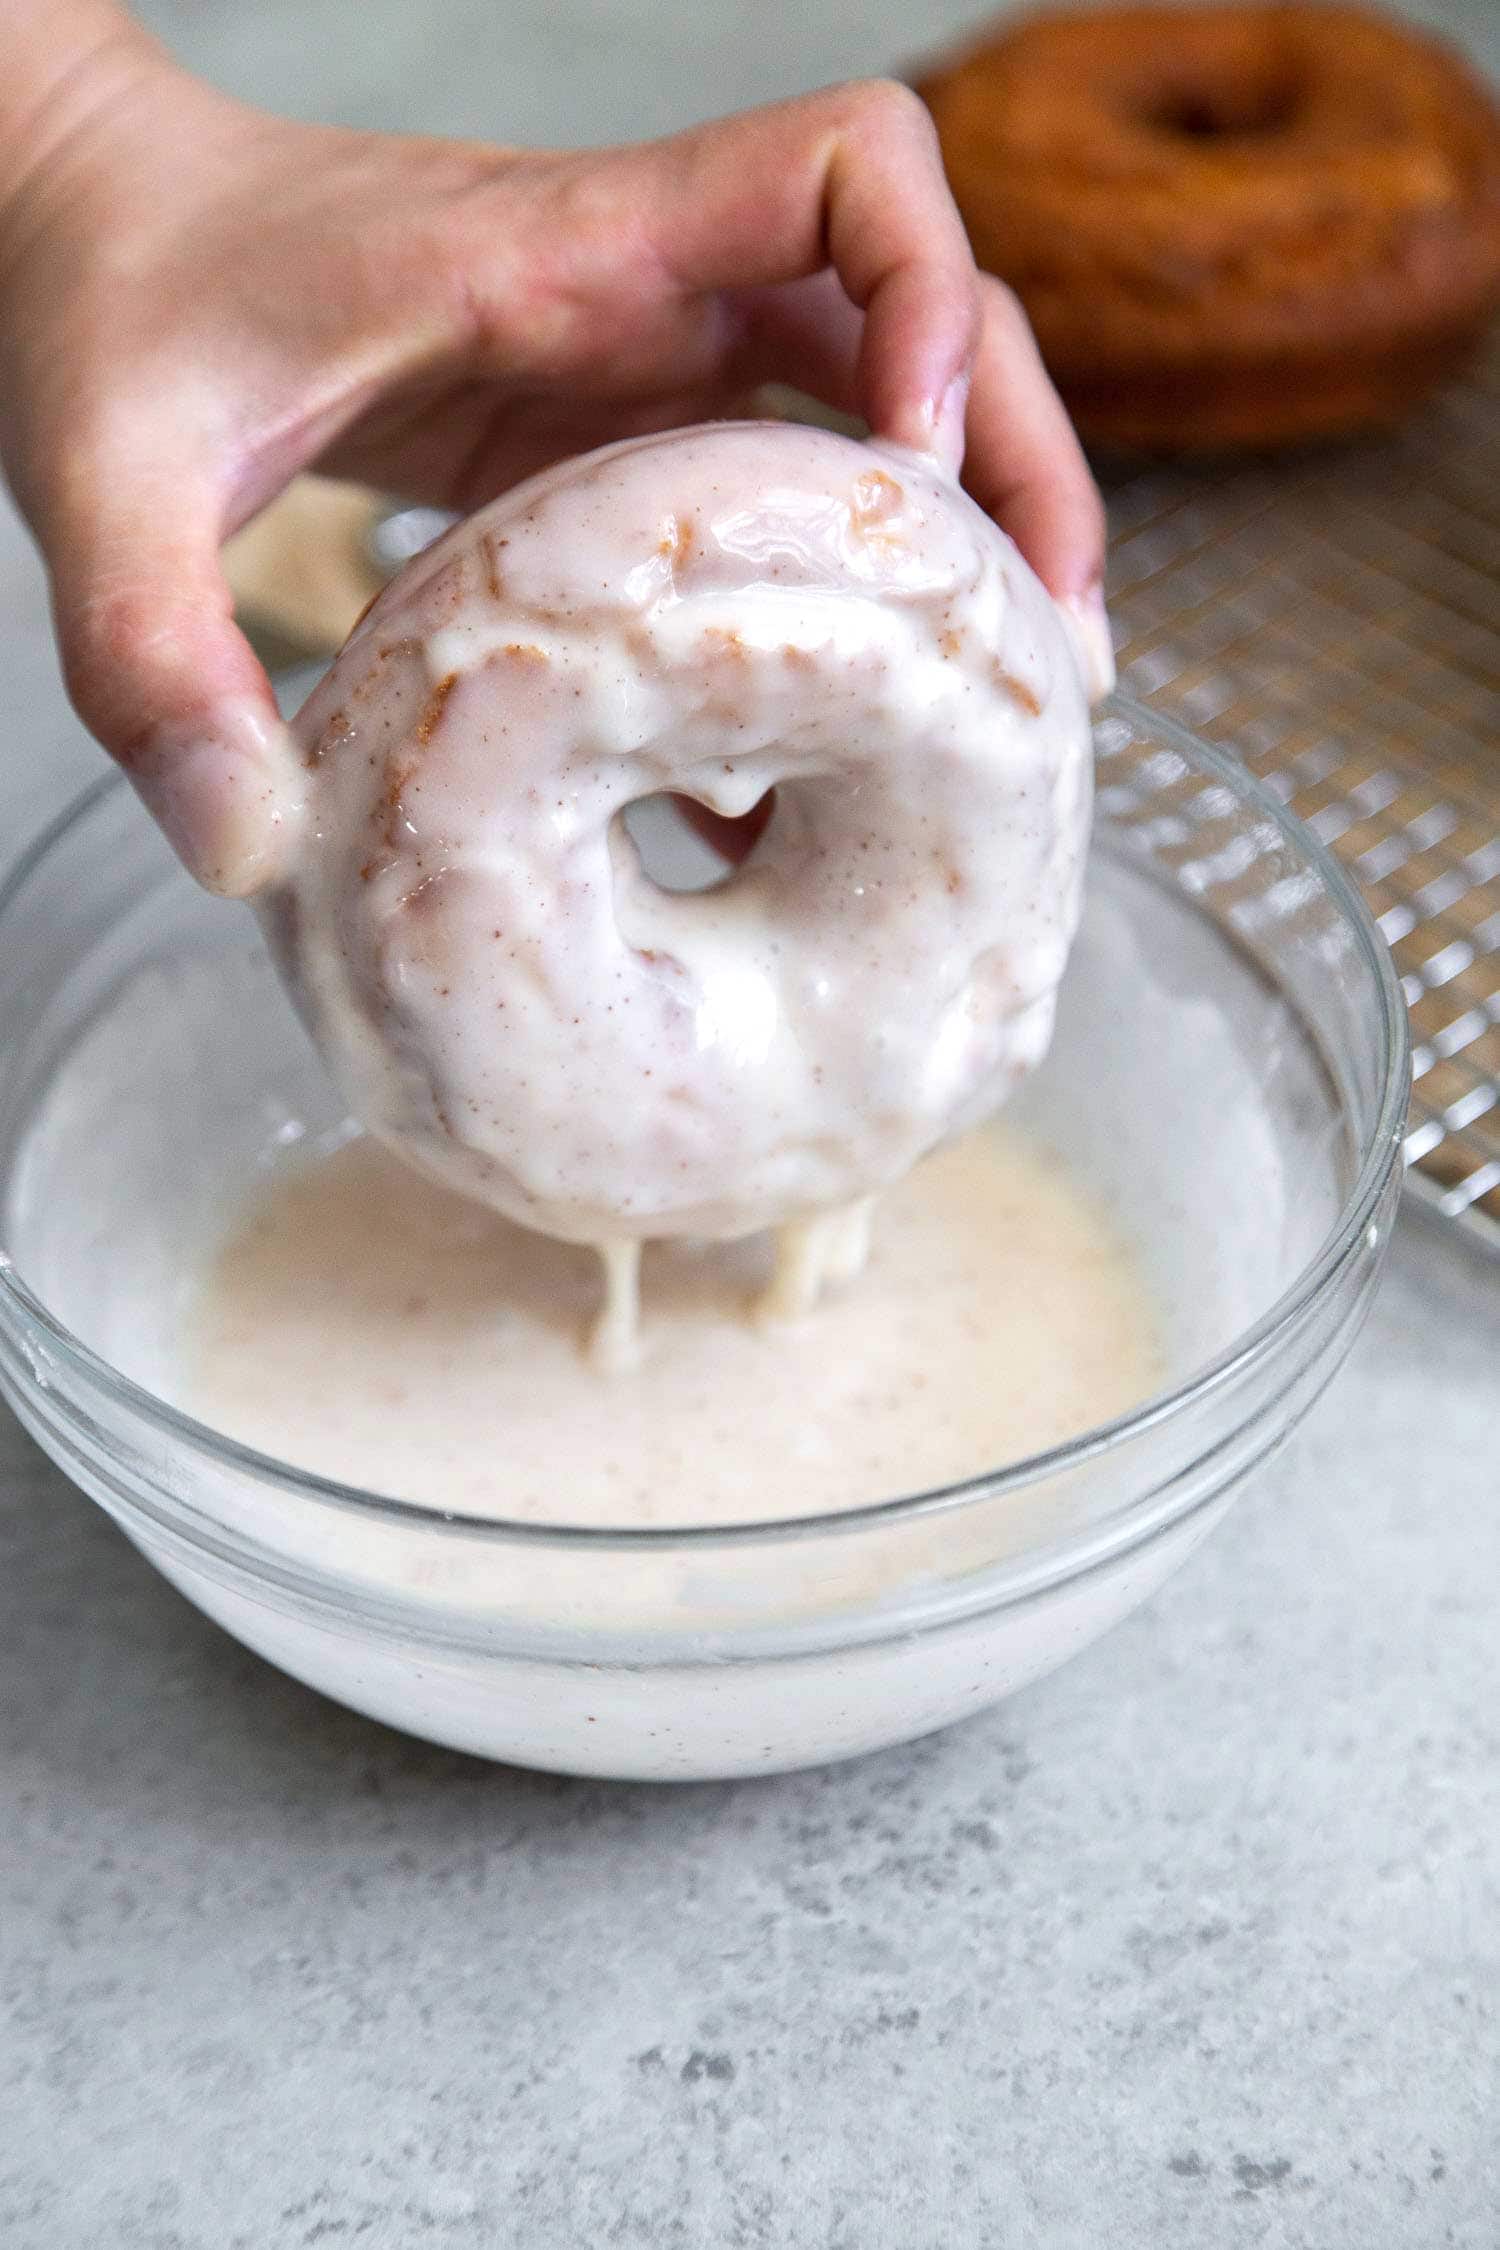 Old fashioned donuts dipped in brown butter glaze. #donuts #oldfashioned #homemade #brownbutter